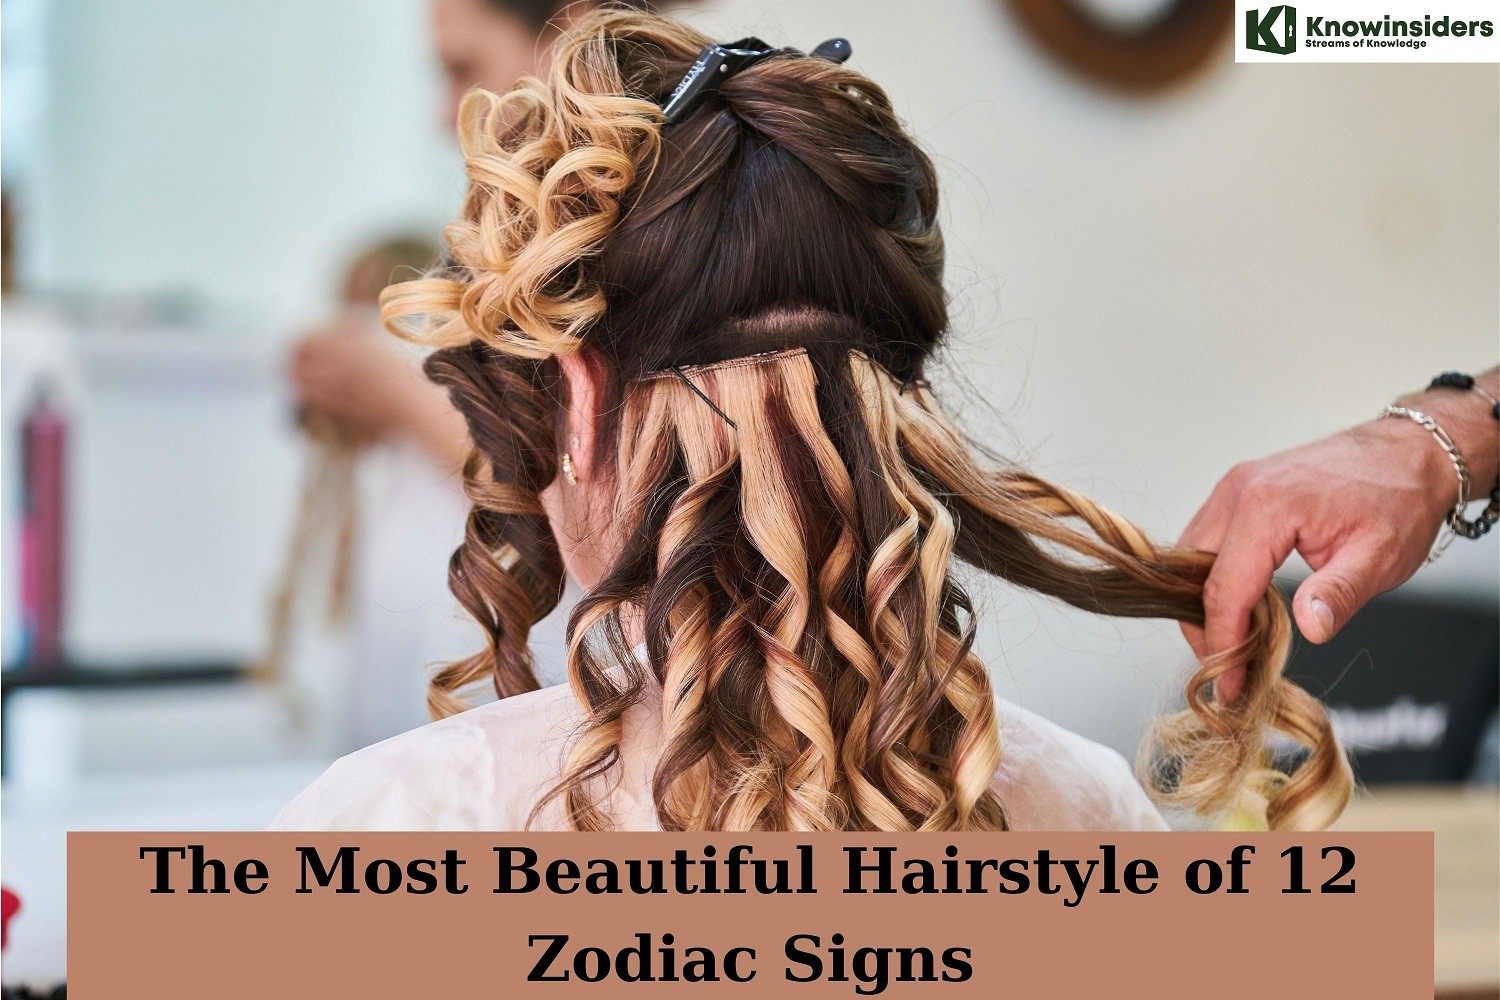 The Most Beautiful Hairstyle of 12 Zodiac Signs